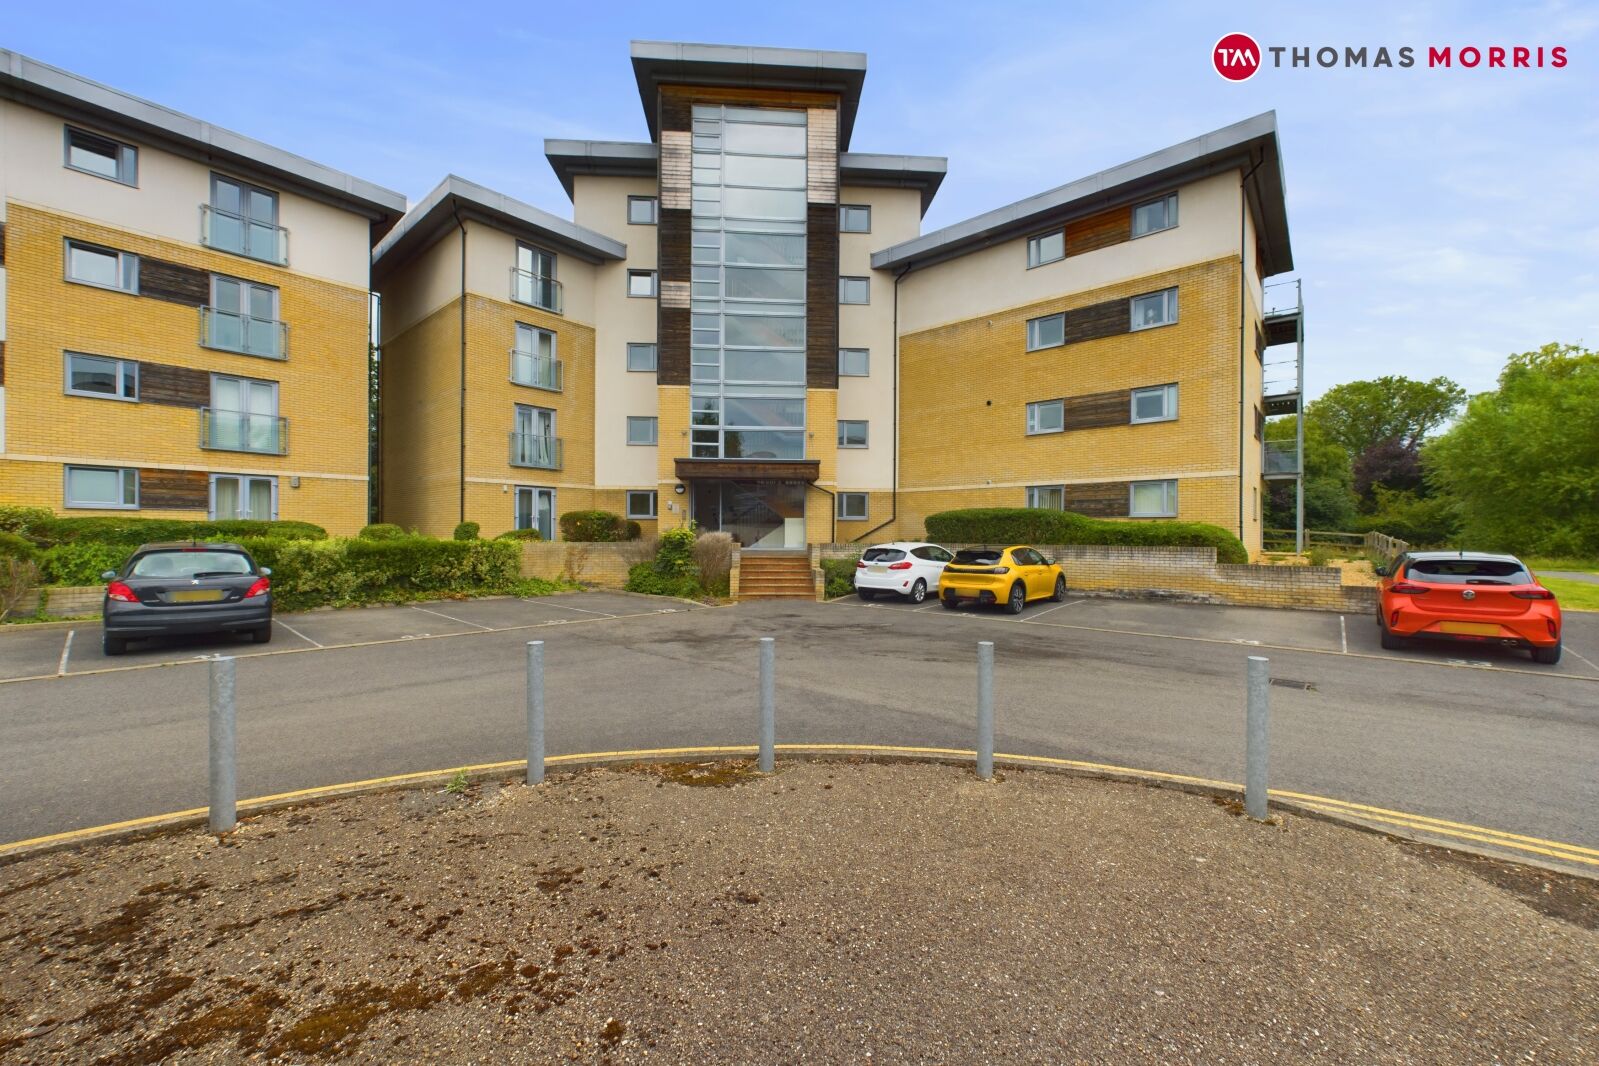 1 bedroom  flat for sale Percy Green Place, Stukeley Meadows, PE29, main image